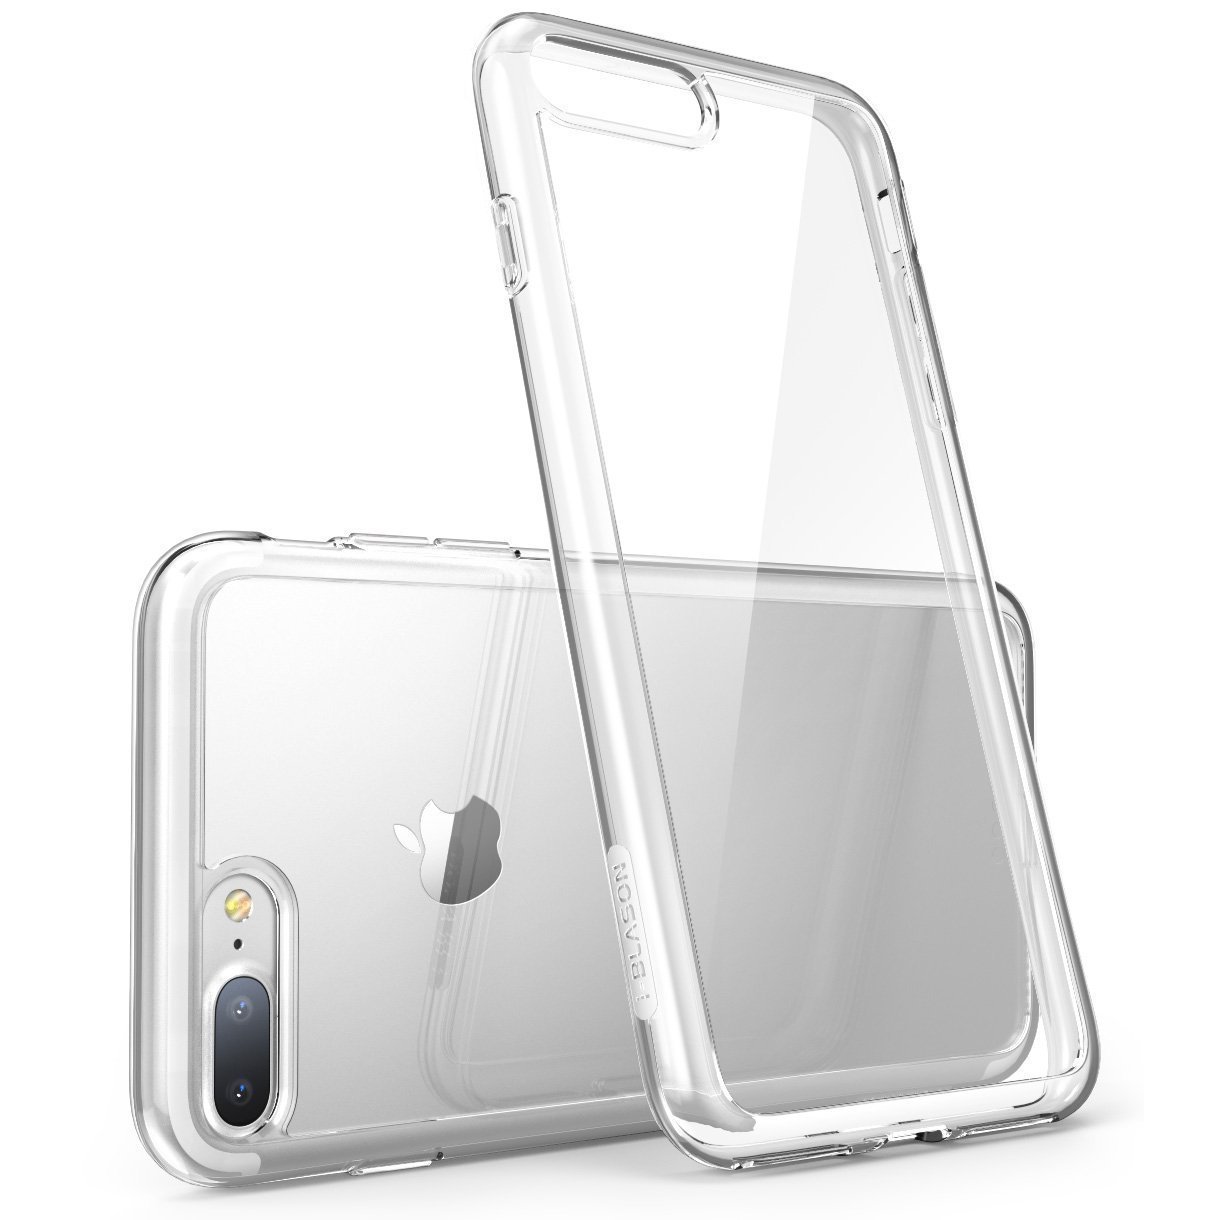 10 Great Clear Cases to Show Off your iPhone 8 Plus iMore